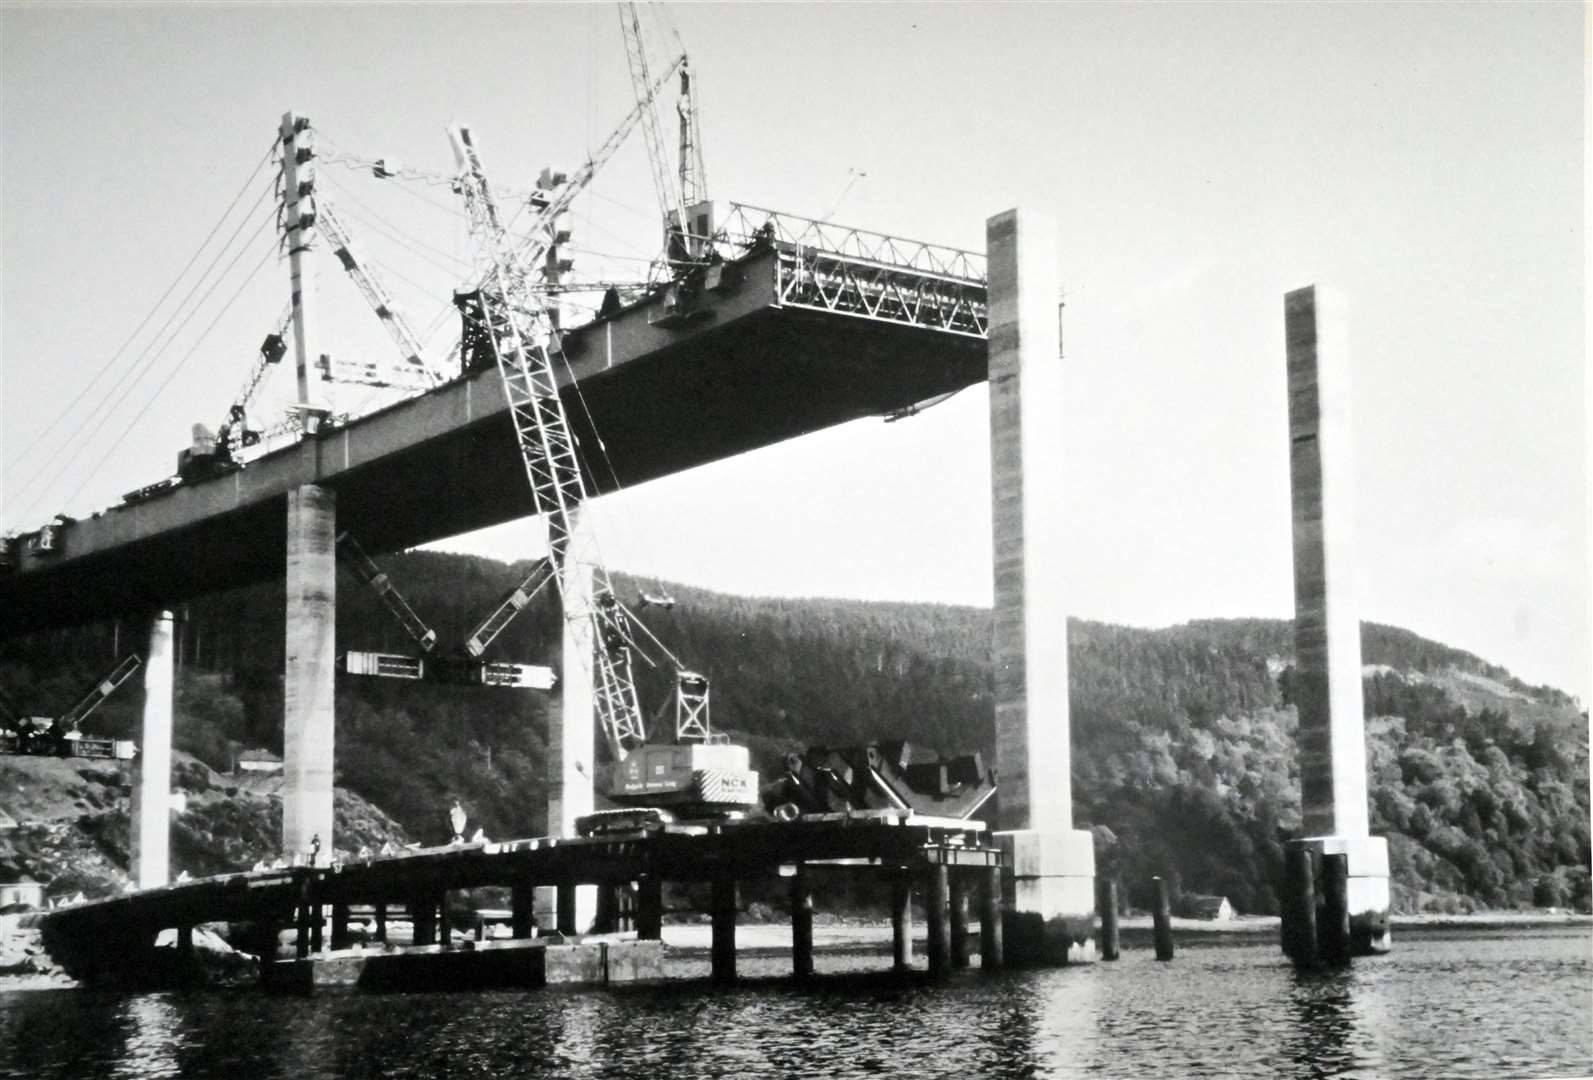 A dramatic image of the bridge under construction.